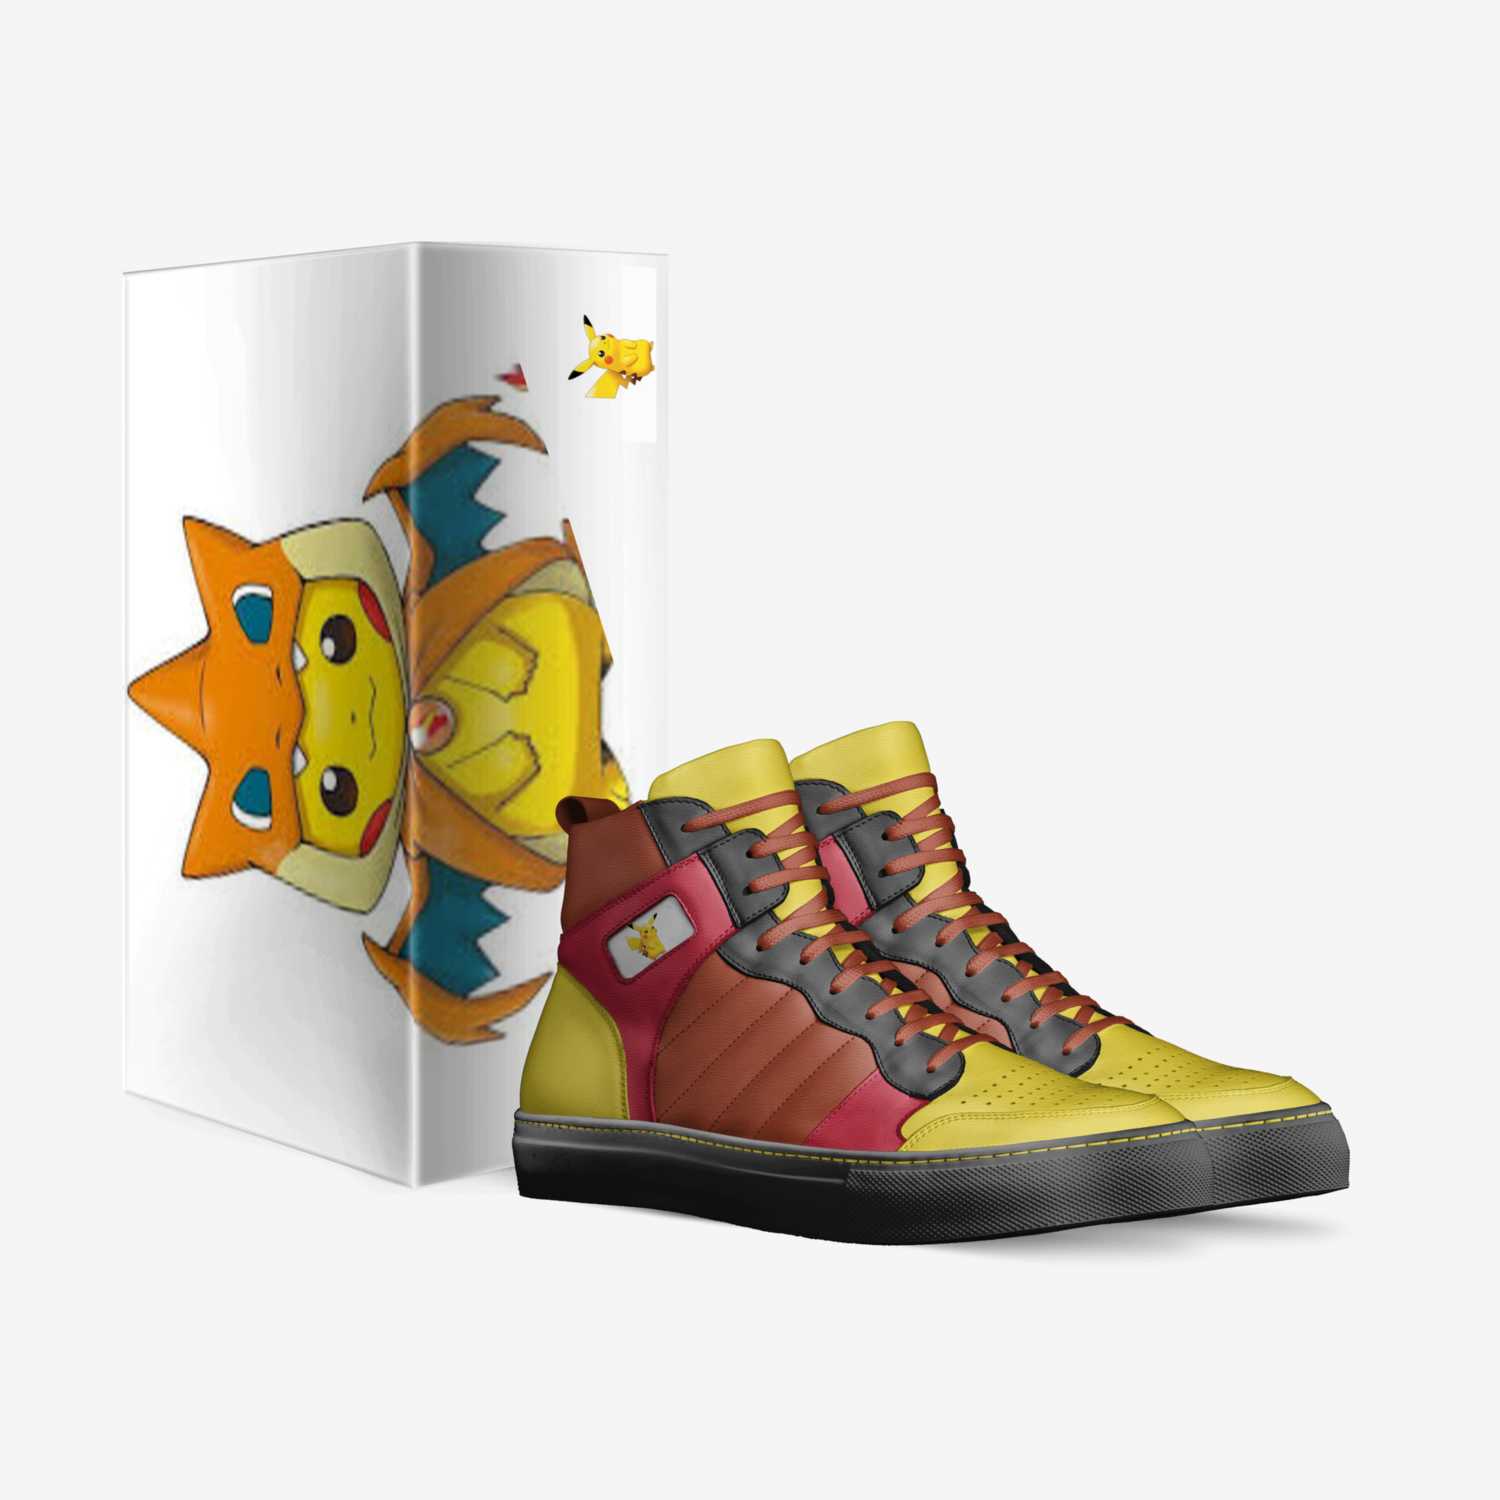 Pikachu custom made in Italy shoes by Alex | Box view